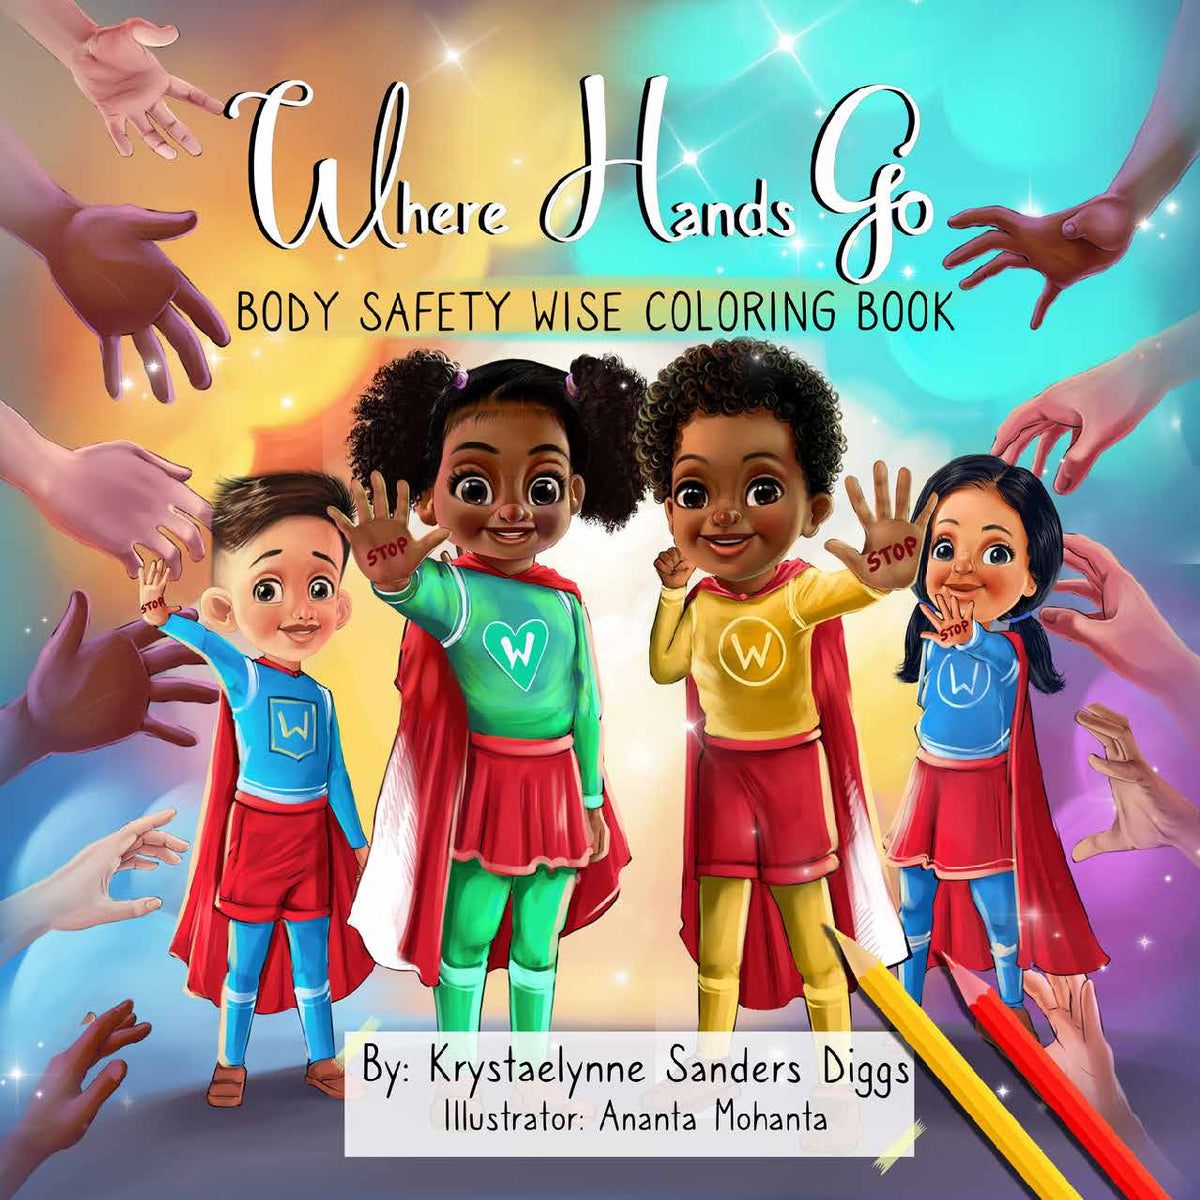 Body Safety Wise (Coloring Book) - Author Krystaelynne Sanders Diggs [Body Safety]